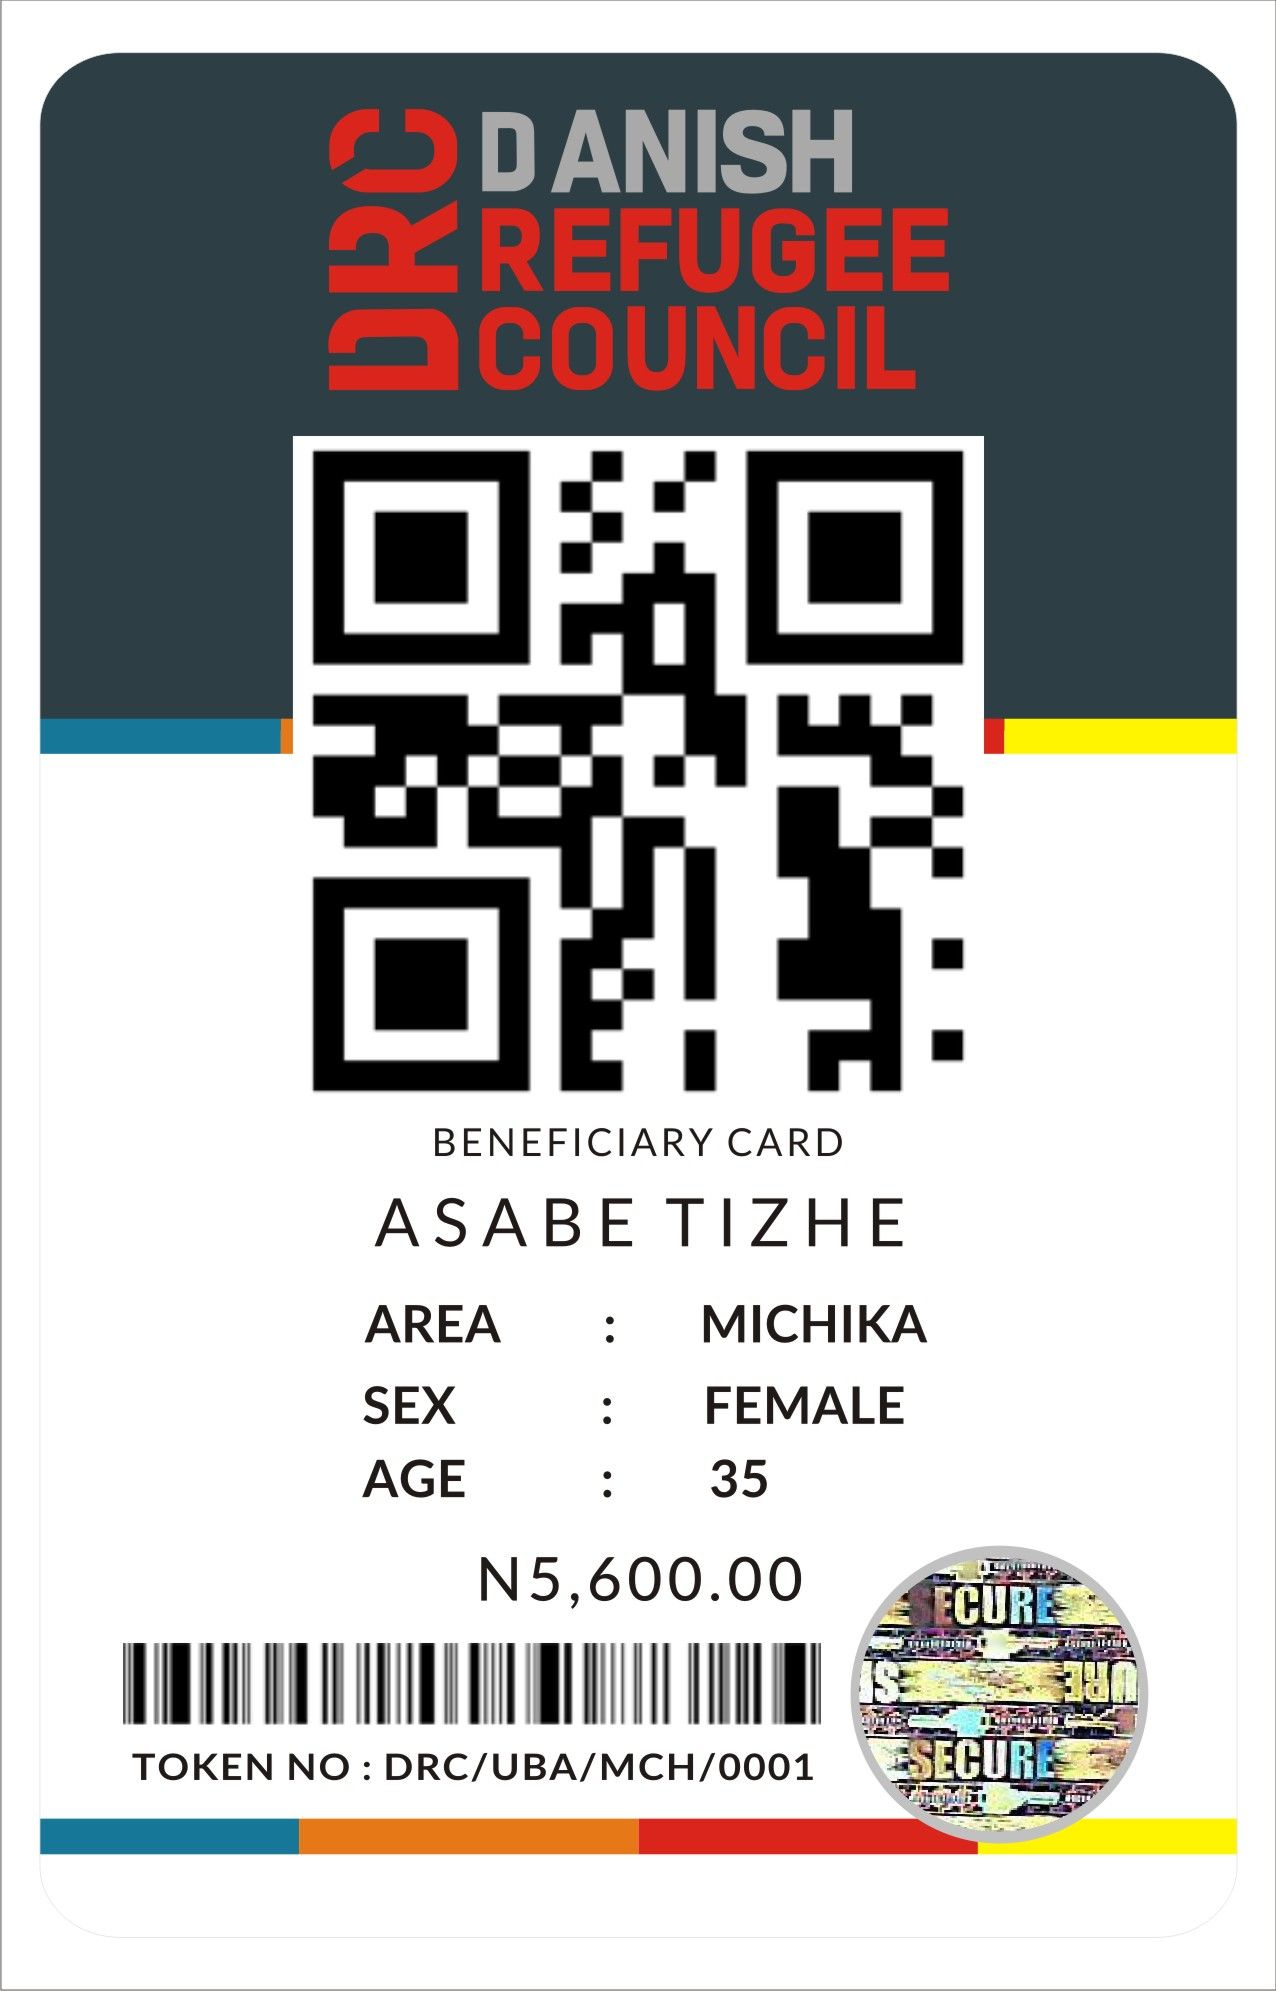 CALL CHINEDU ON 09022536974 TO PRINT BAR CODE STICKERS, QR CODE STICKERS AND HOLOGRAMS ON CERTIFICATES AND DOCUMENTS